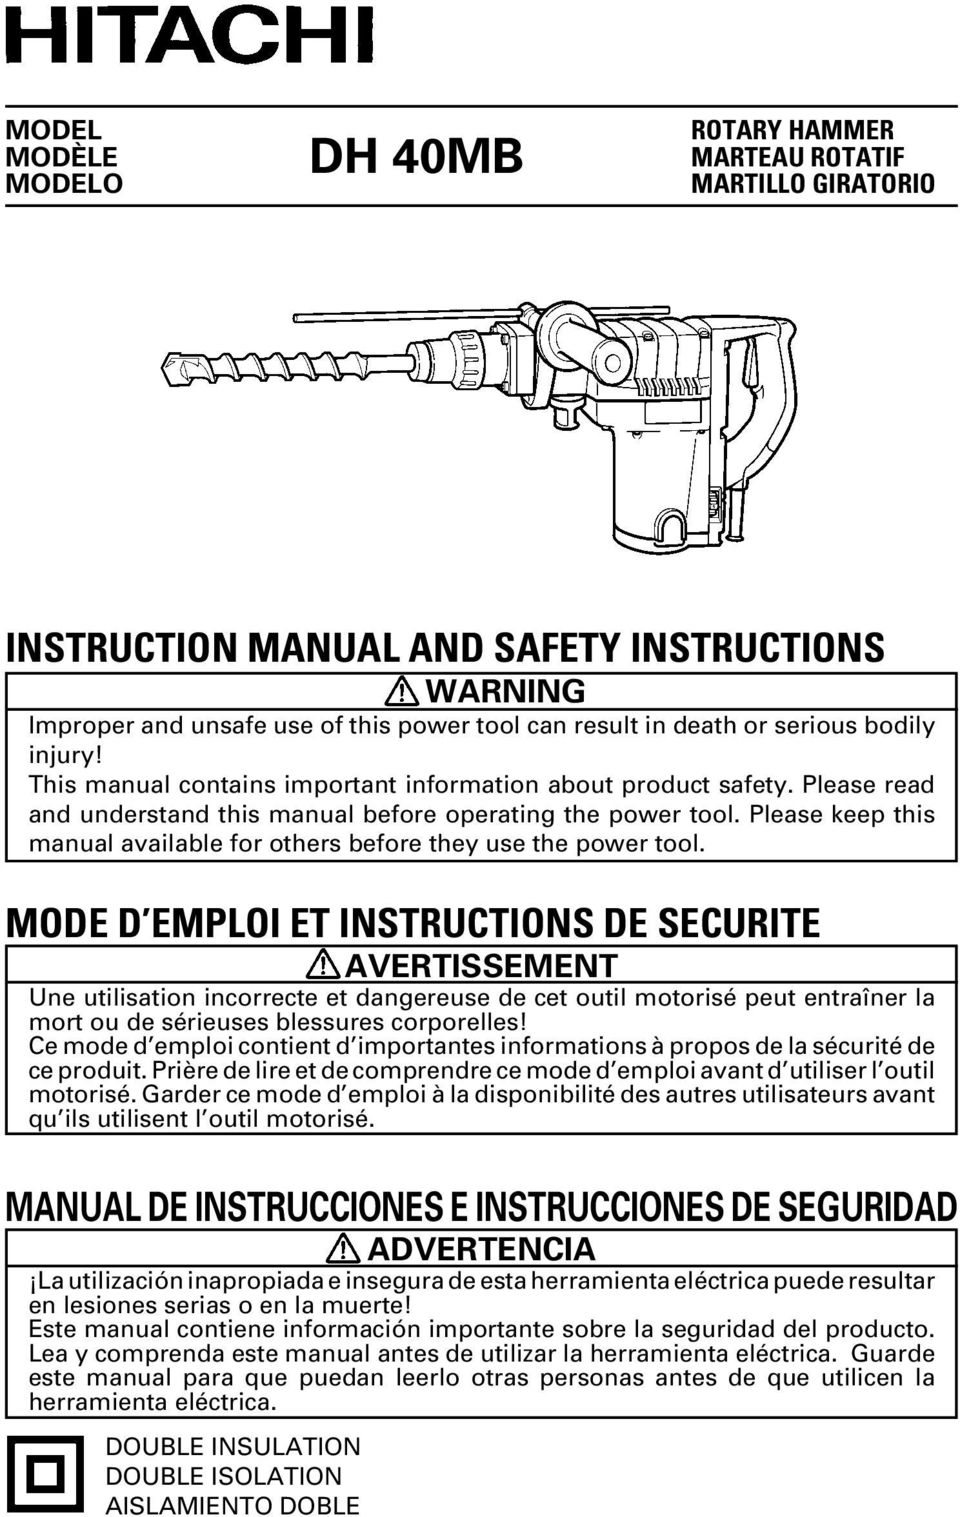 Please keep this manual available for others before they use the power tool.